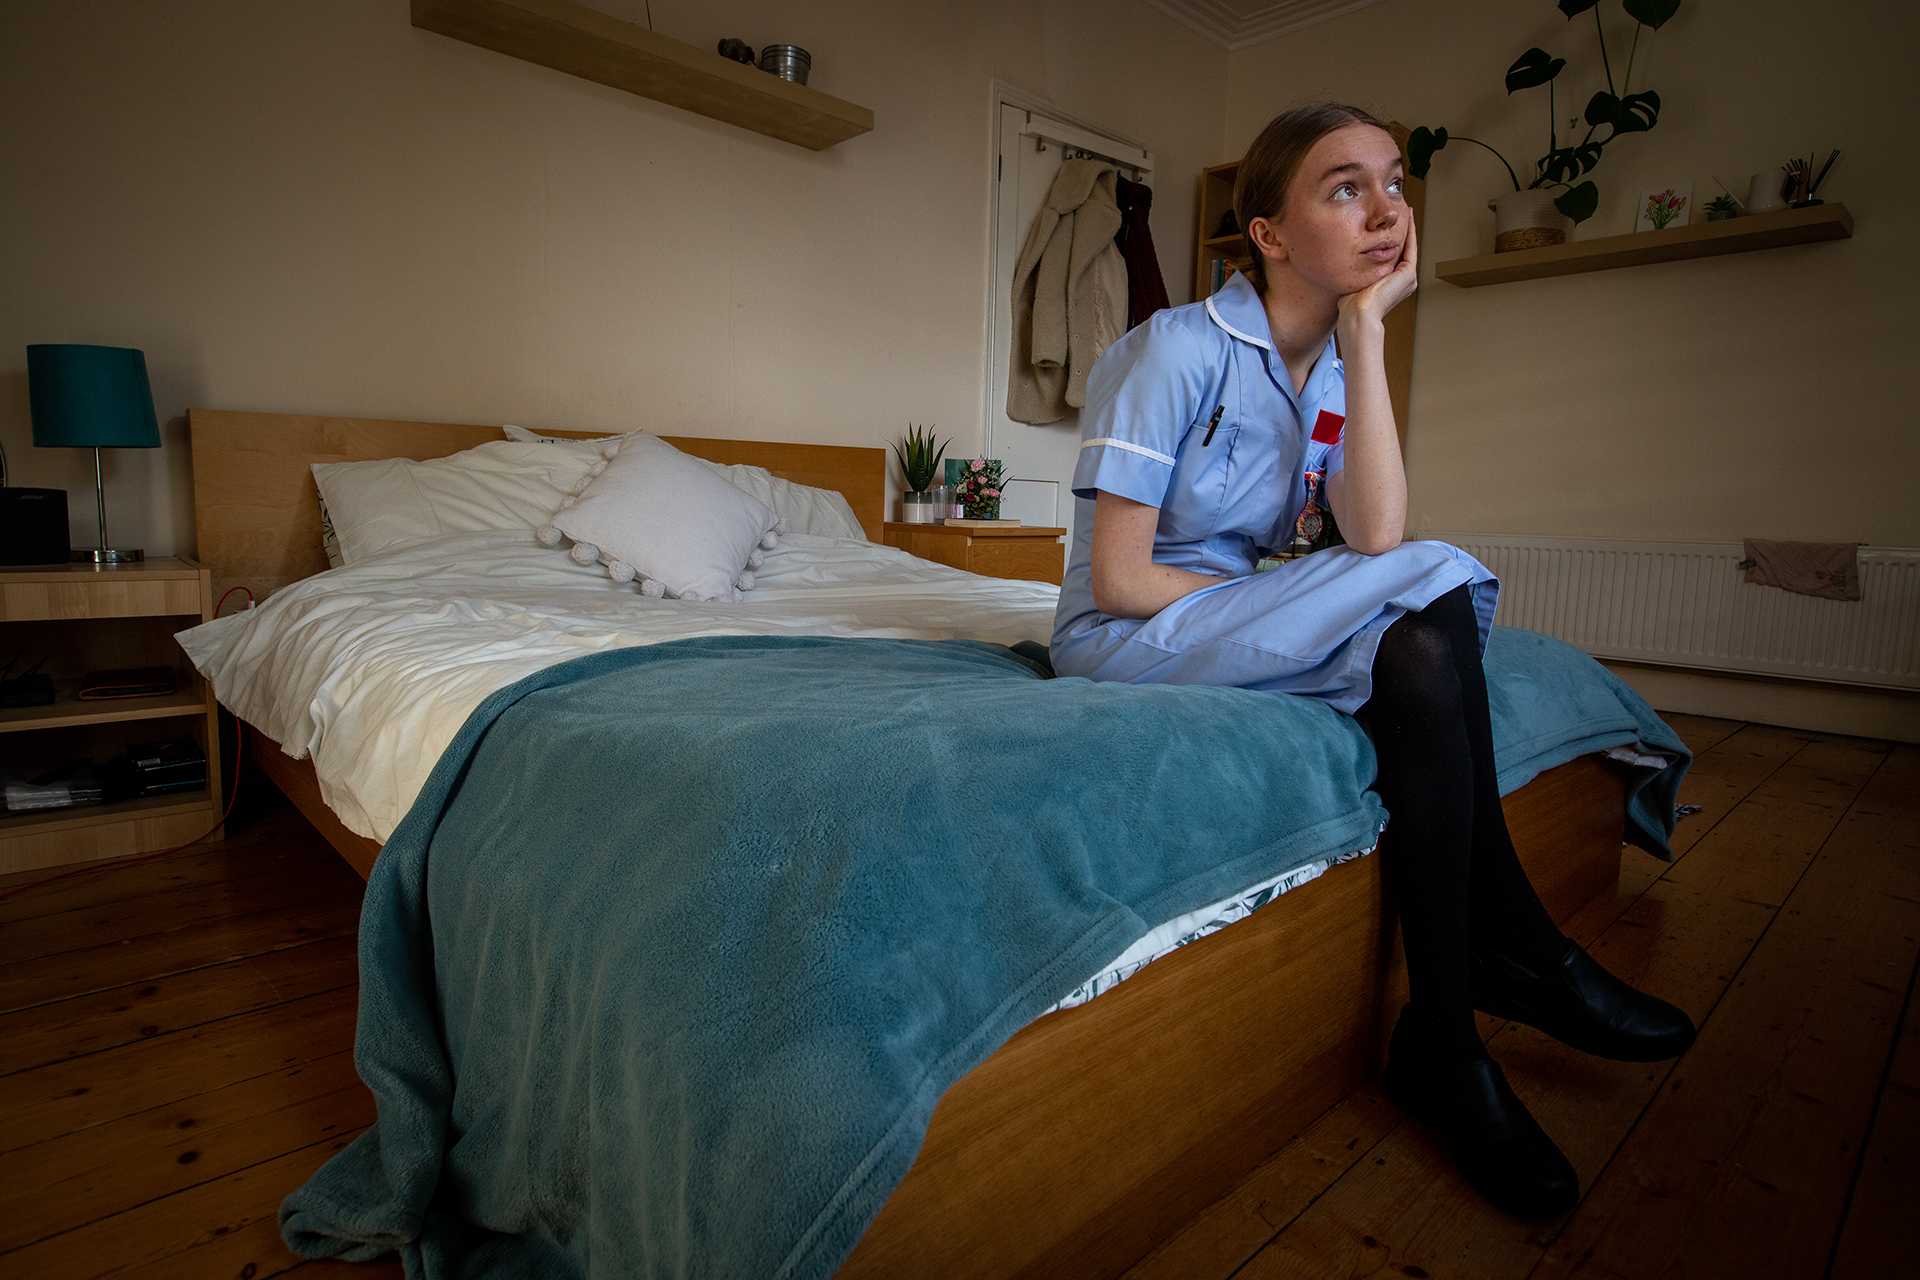 An image from a series documenting student midwives in their home environments. What I have seen, from getting to know these student midwives, is that midwifery is more of a way of life than a job. Only those that are truly passionate about midwifery can succeed.